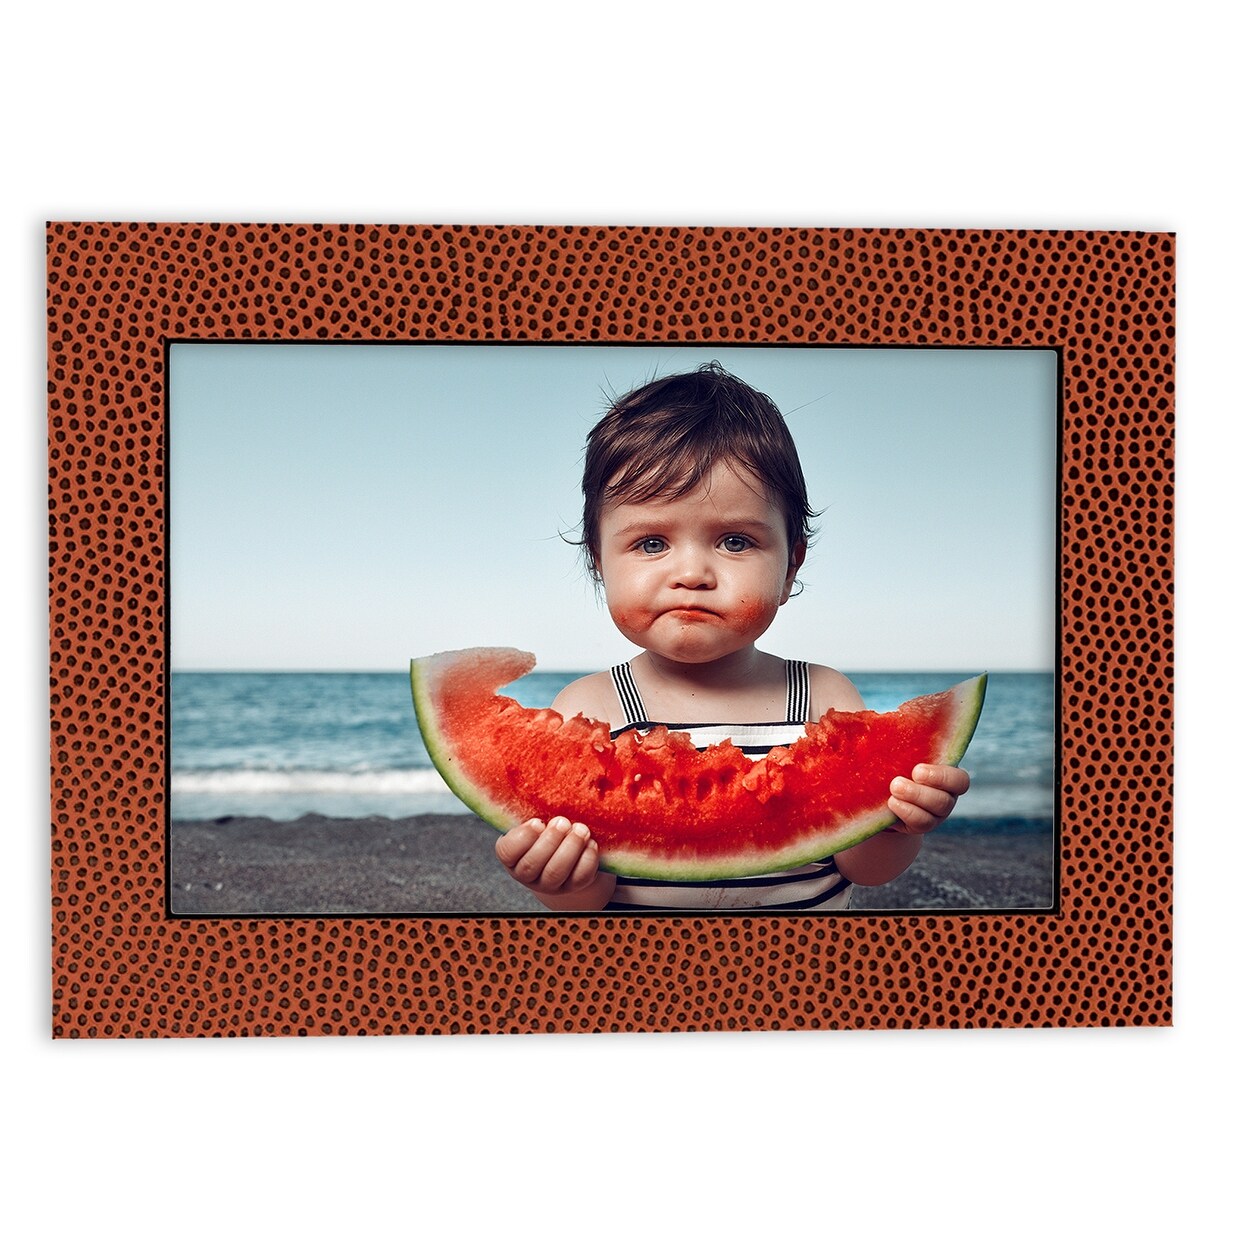 24x36 Mat for 20x30 Photo - Football Texture Matboard for Frames Measuring 24  x 36 In- To Display Art Measuring 20 x 30 Inches - Bed Bath & Beyond -  38872481